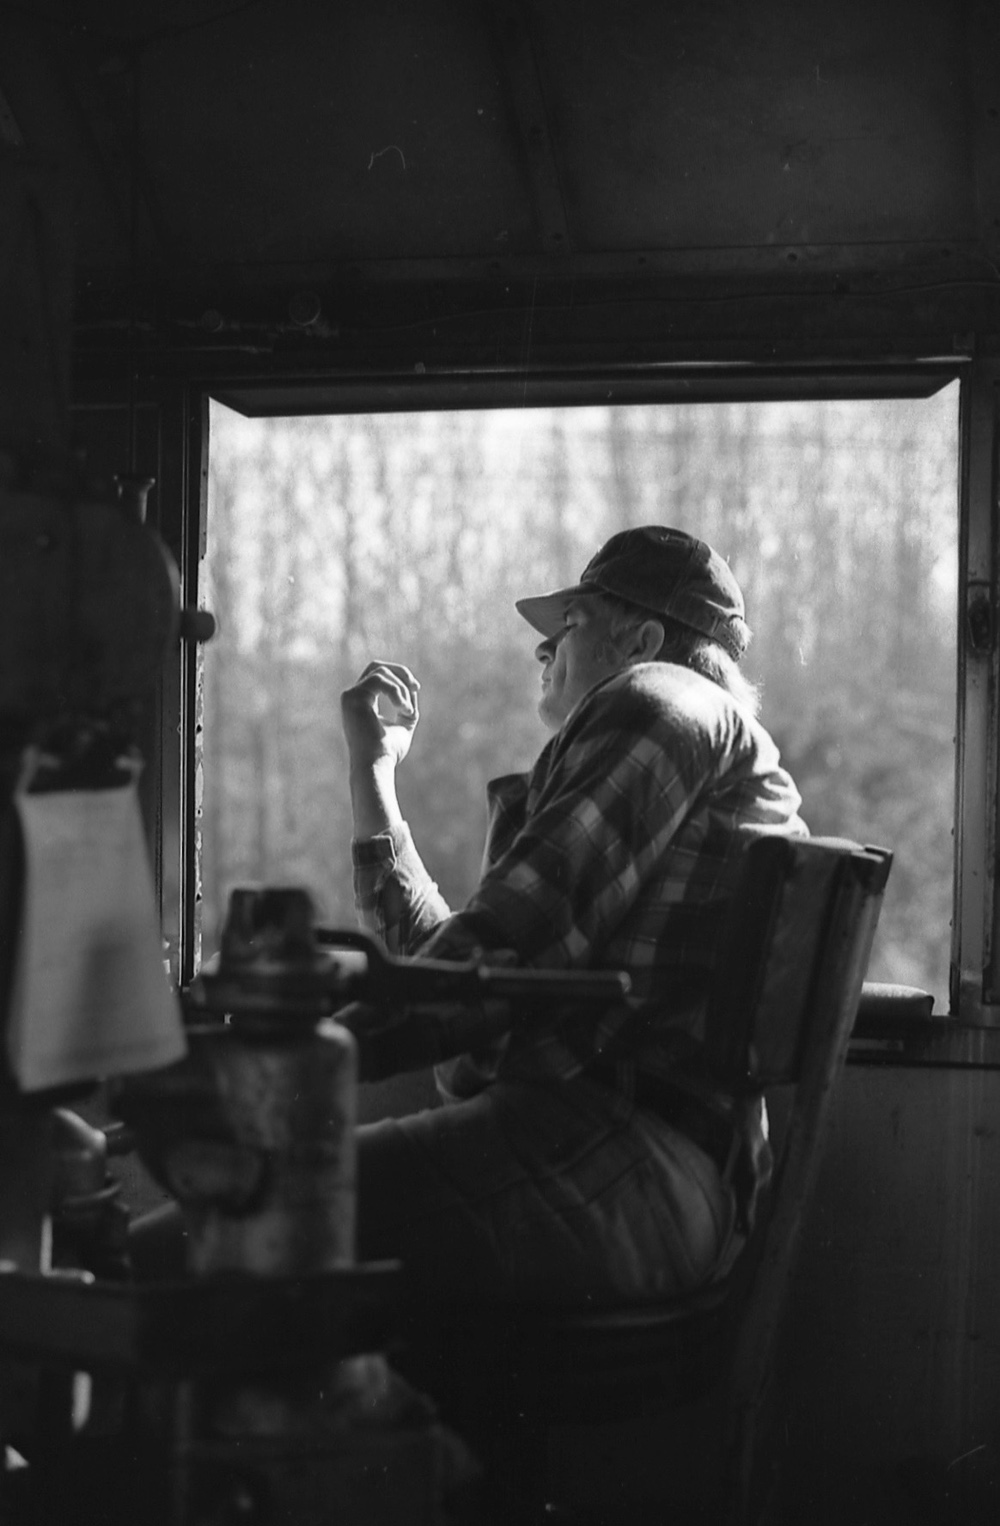 man with plaid shirt and hat on in engineer's seat